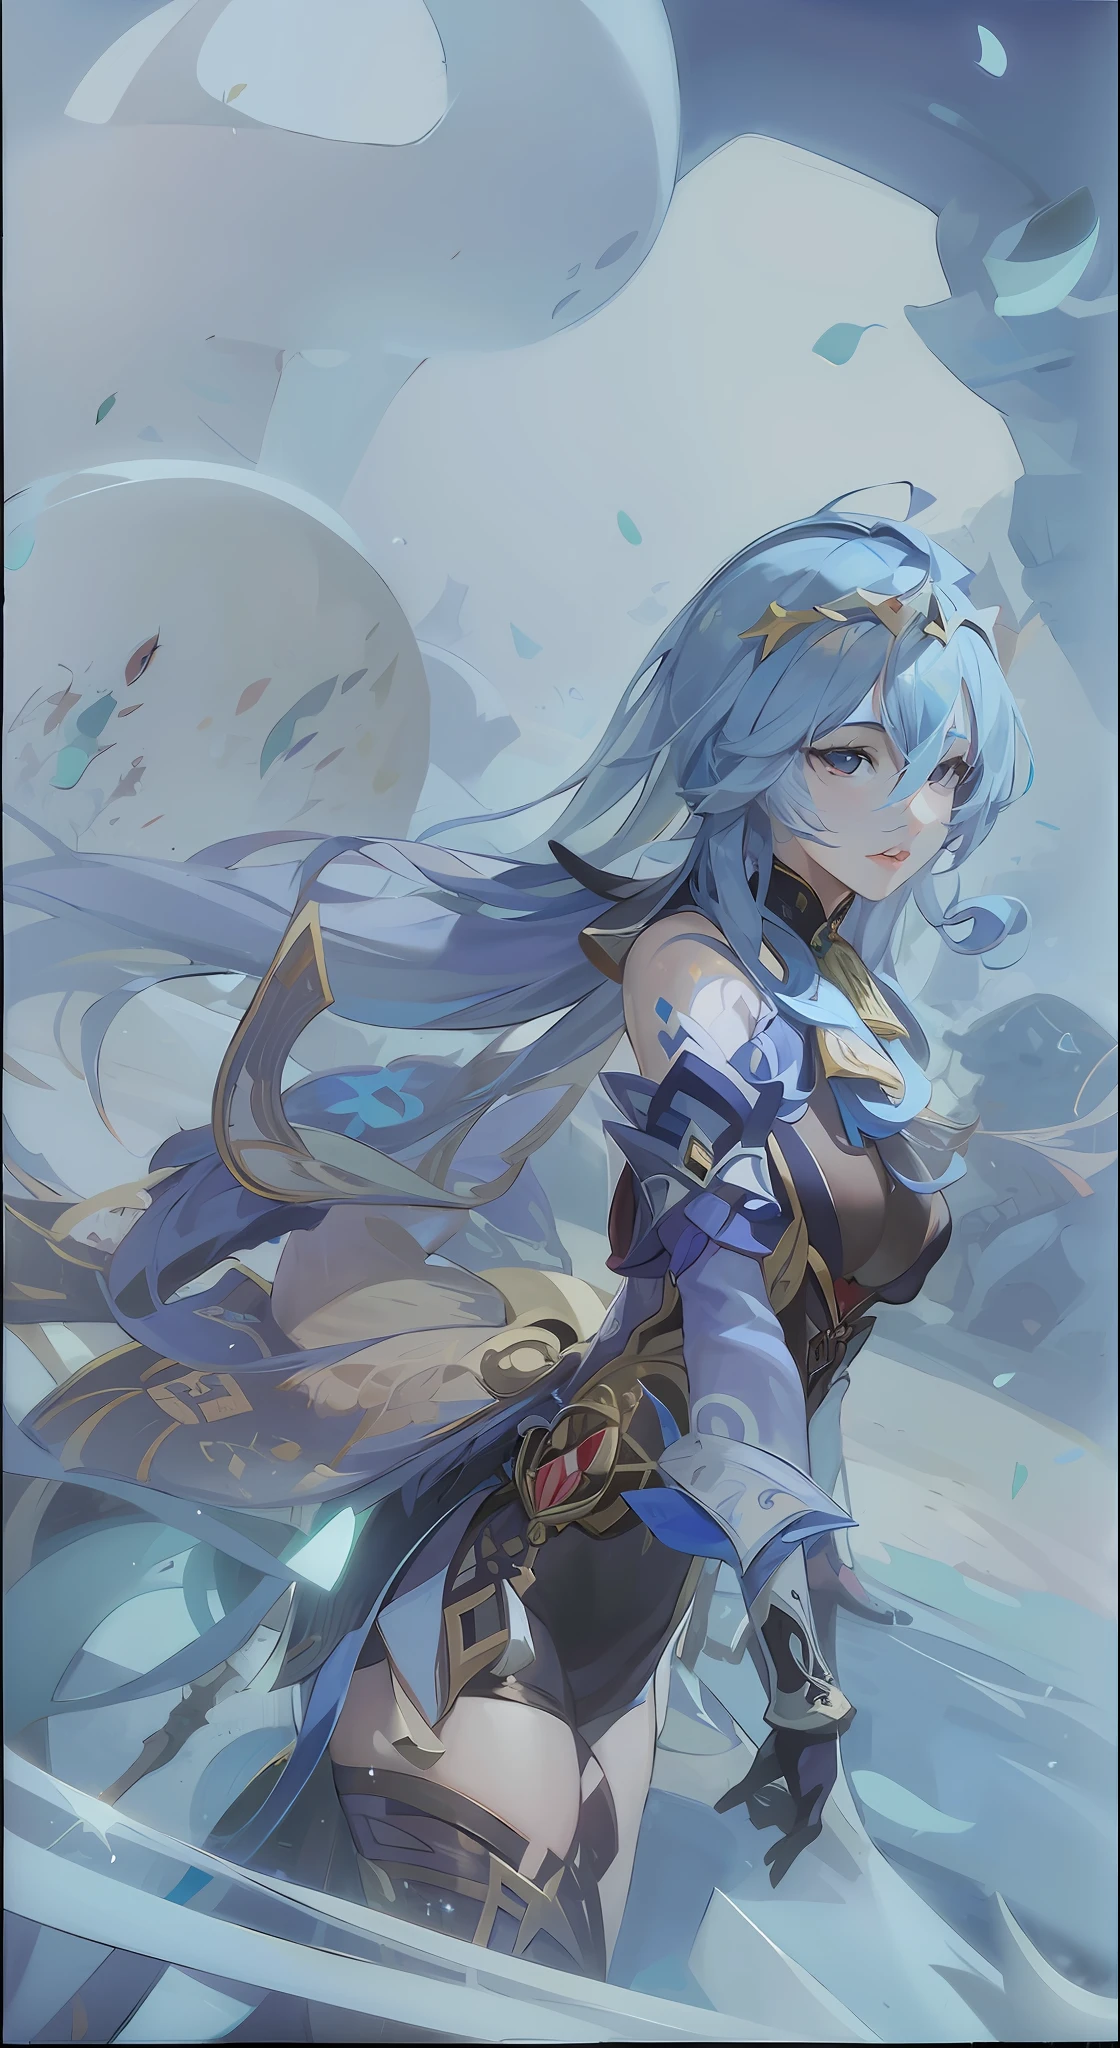 Anime - style painting of a woman with blue hair and a sword, Portrait Chevaliers du Zodiaque Fille, Extremely detailed Artgerm, Keqing from Genshin Impact, Art germ on ArtStation Pixiv, ! Dream art germ, art-style, artgerm 4 k, Fanart Meilleure ArtStation, Art germ. anime illustration